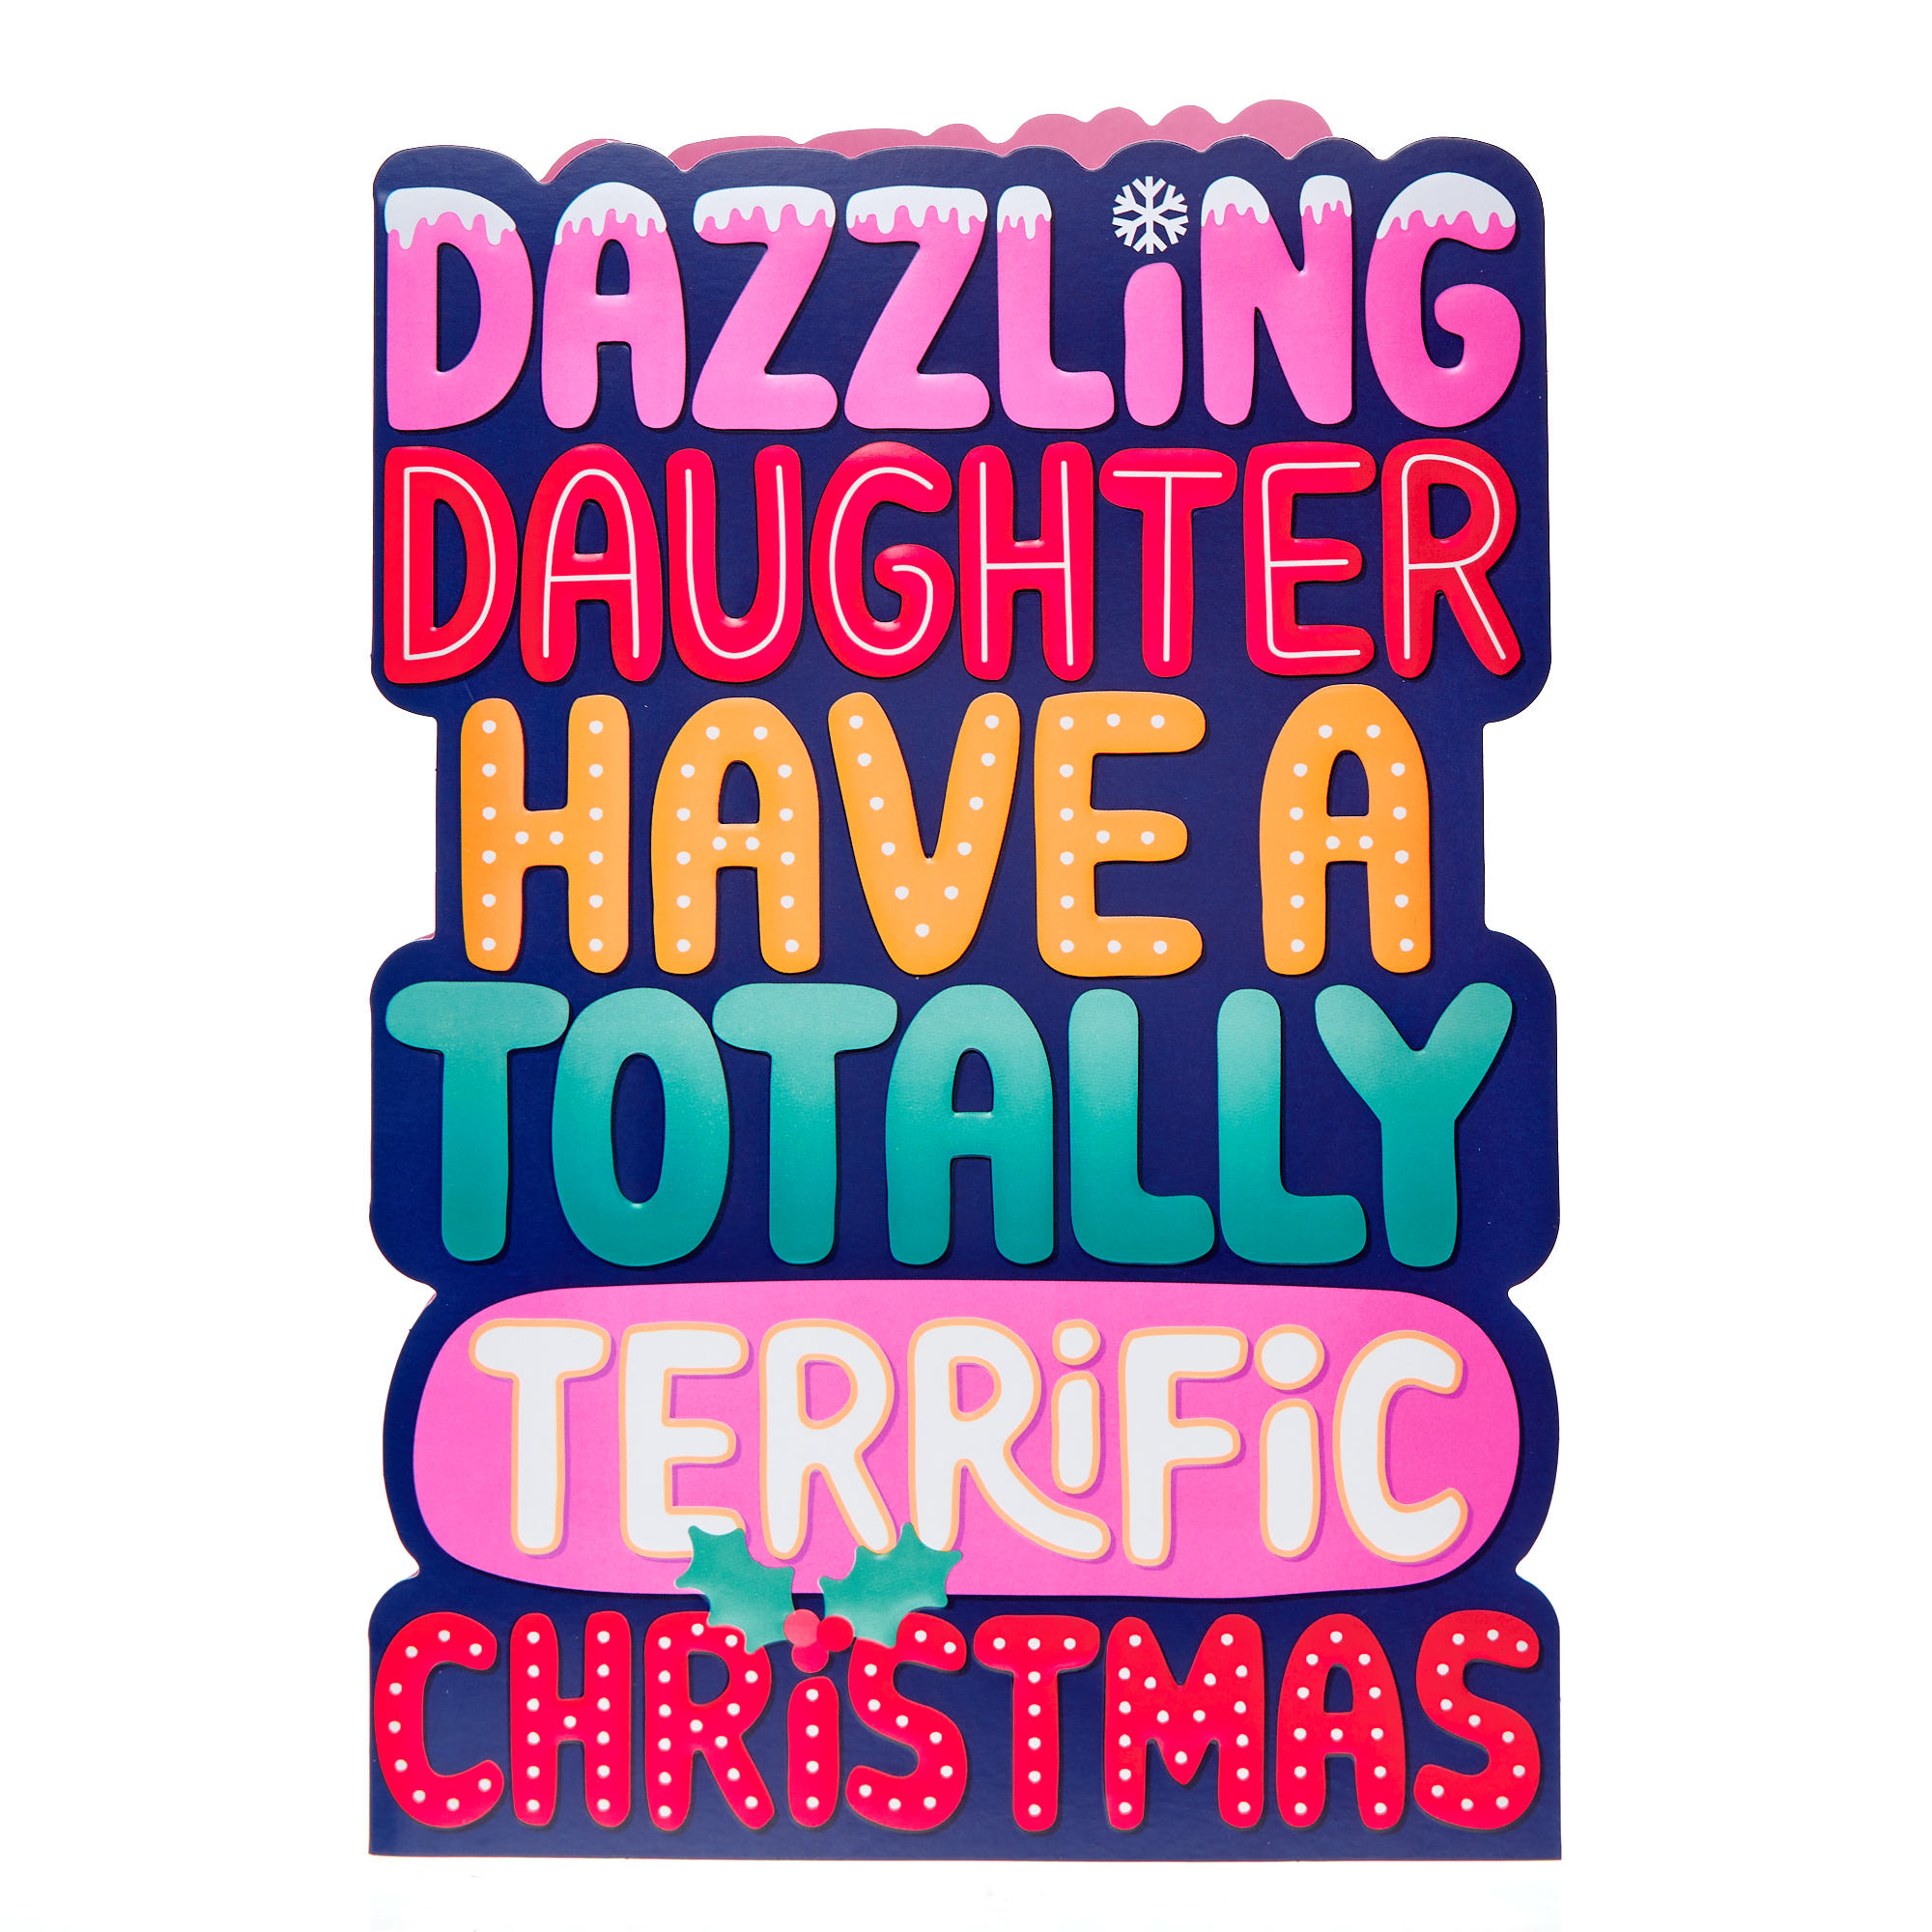 Dazzling Daughter Totally Terrific Christmas Card